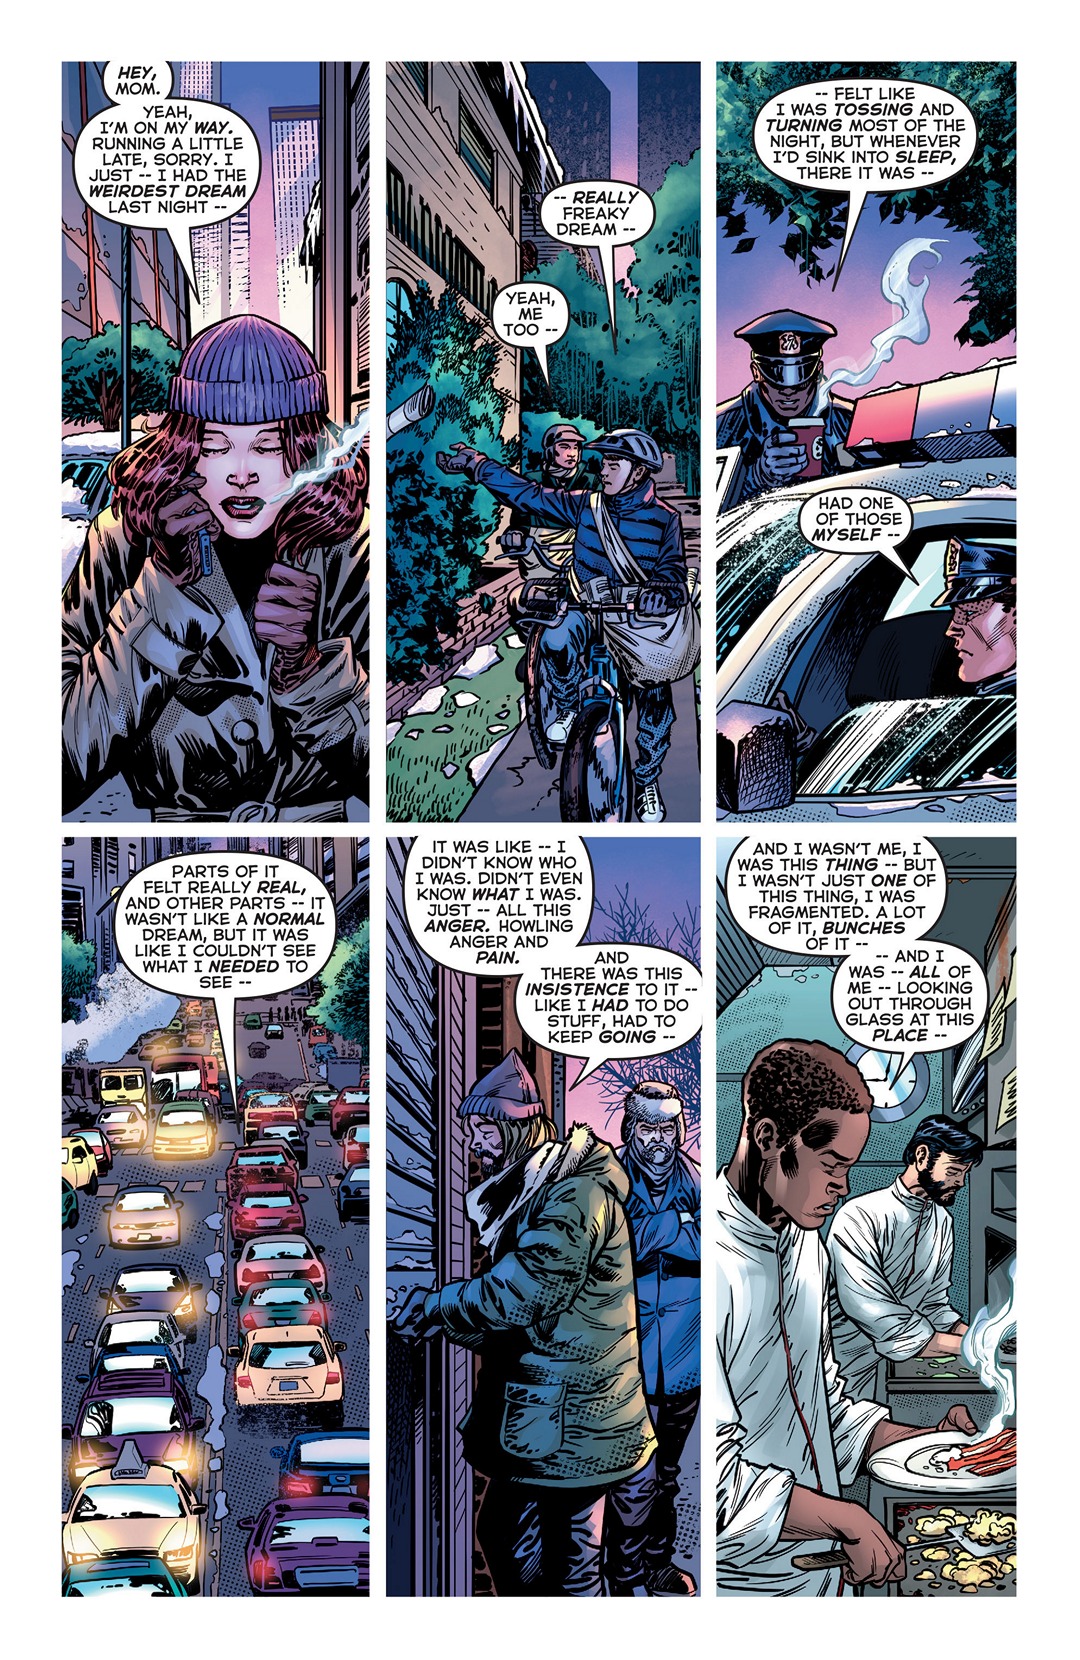 Astro City (2013-): Chapter 31 - Page 2